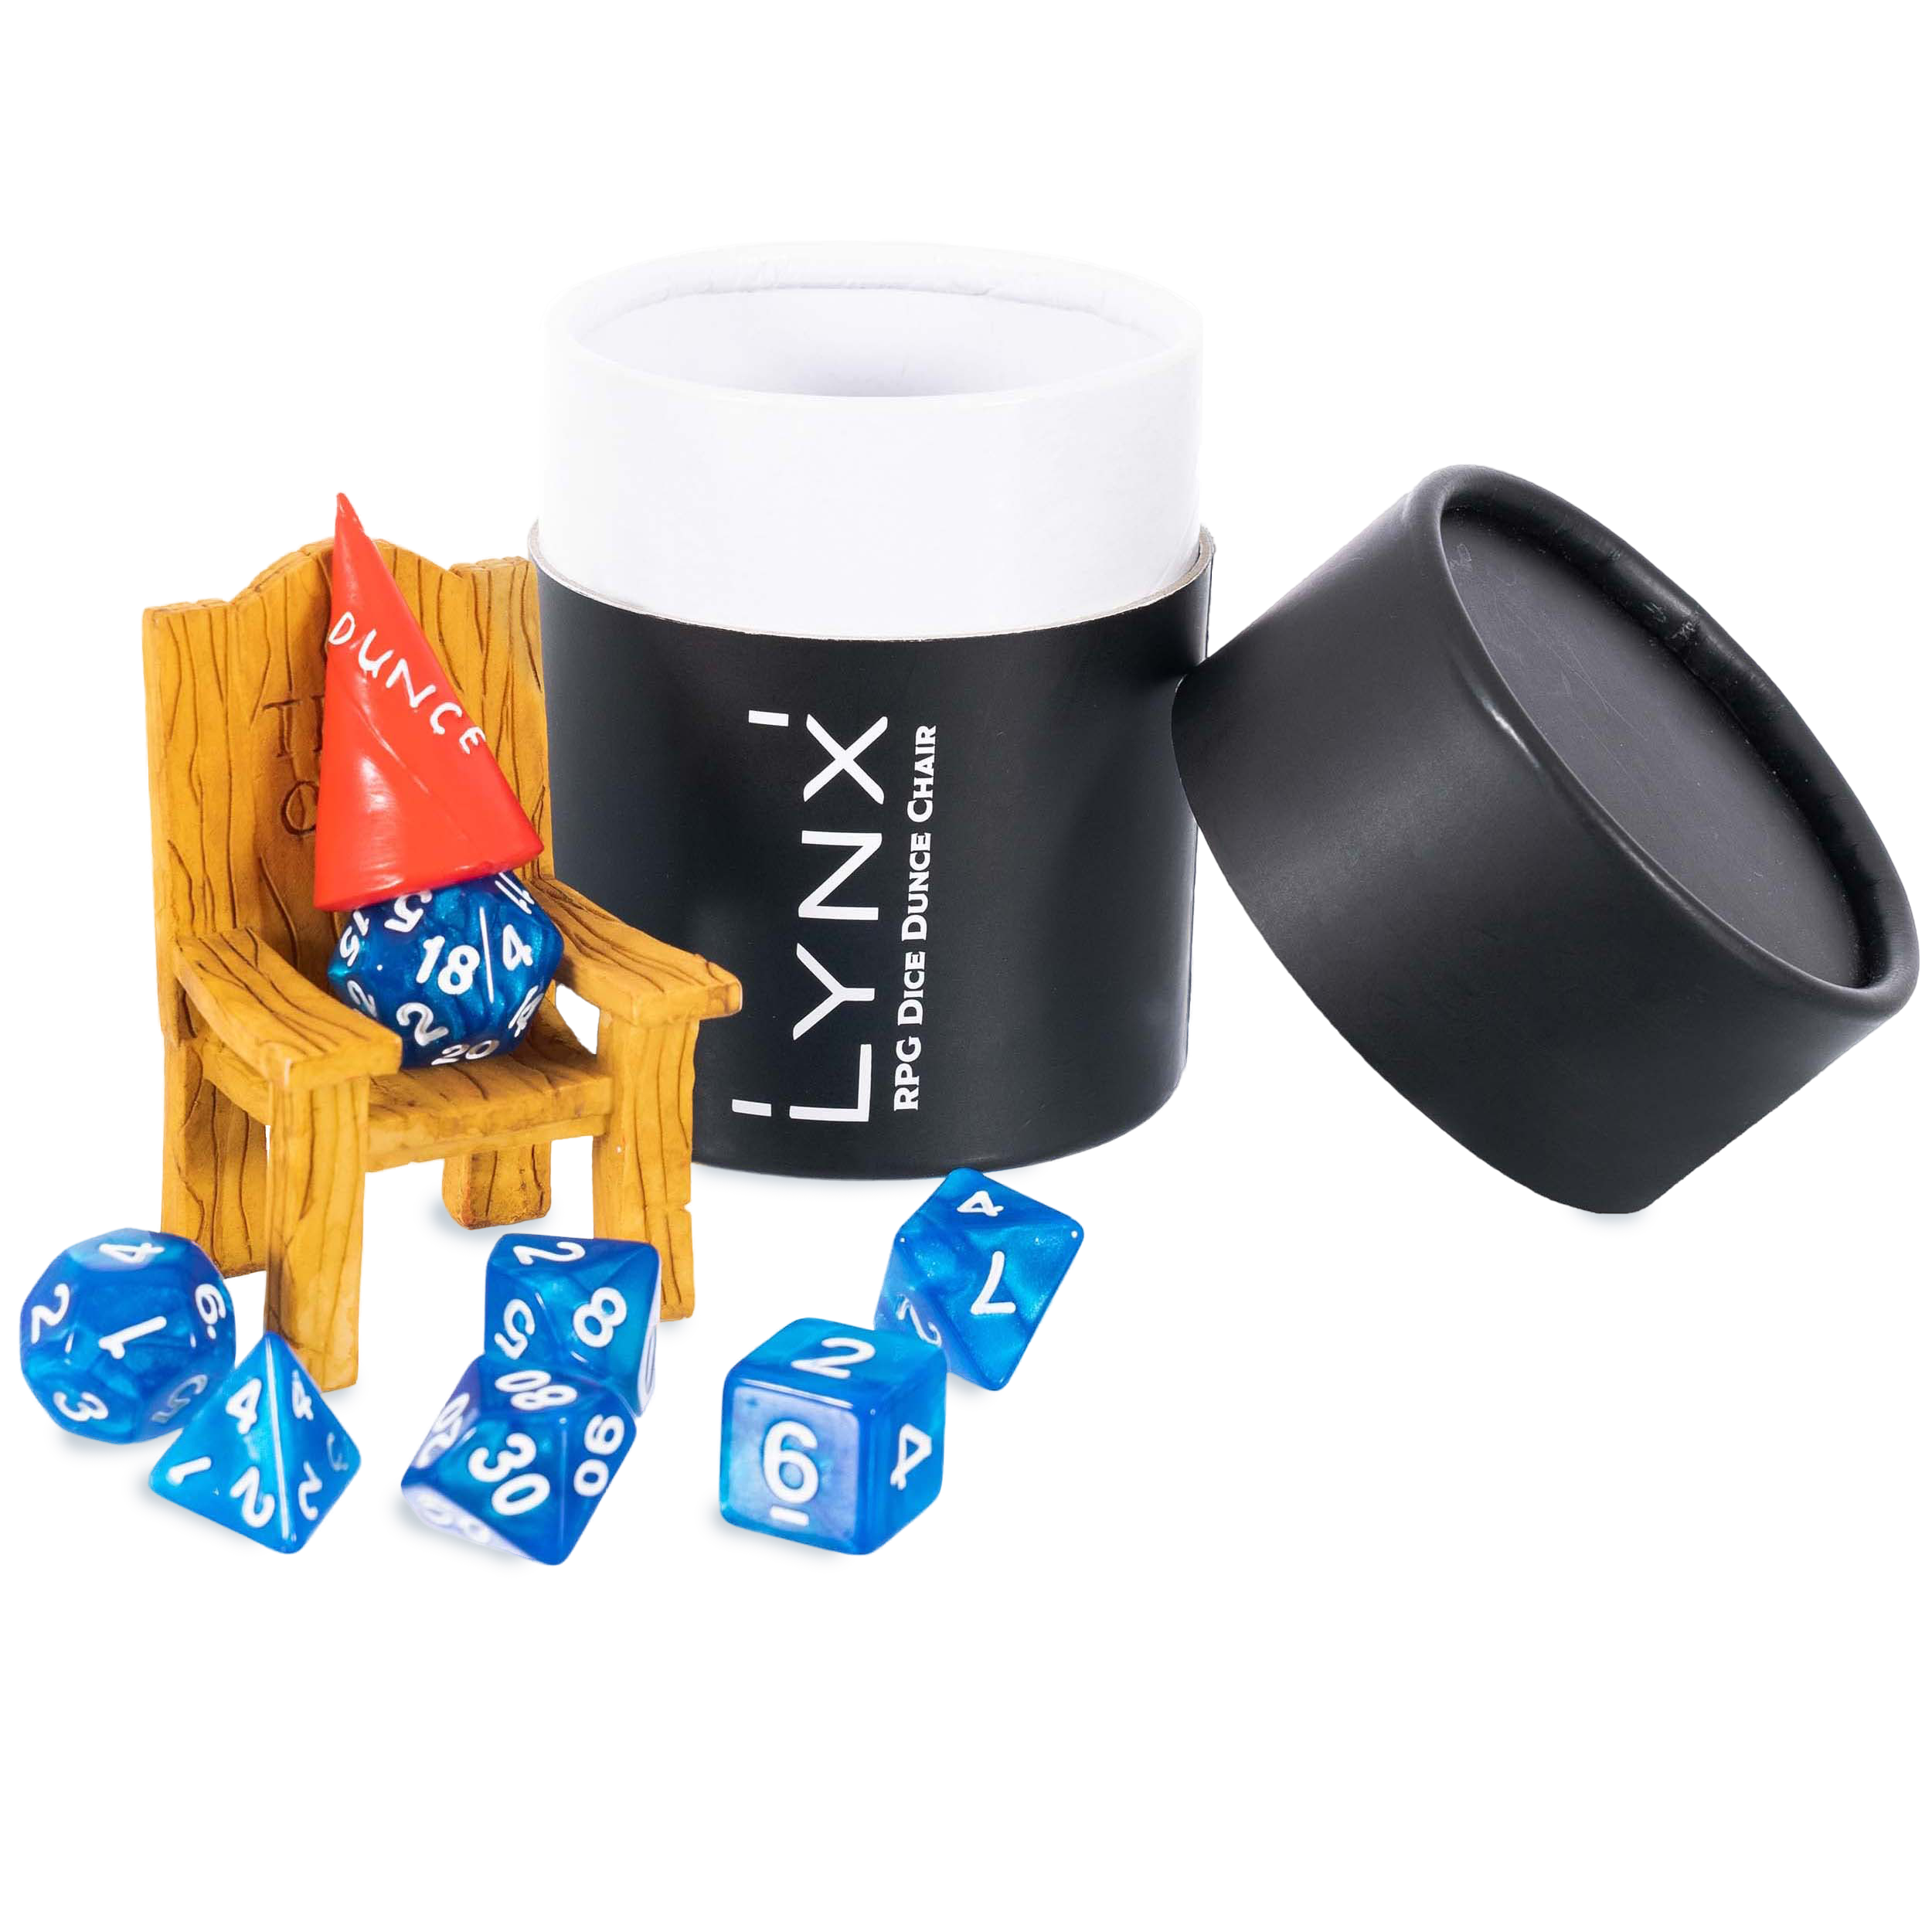 Dice Jail Chair & Dunce Hat